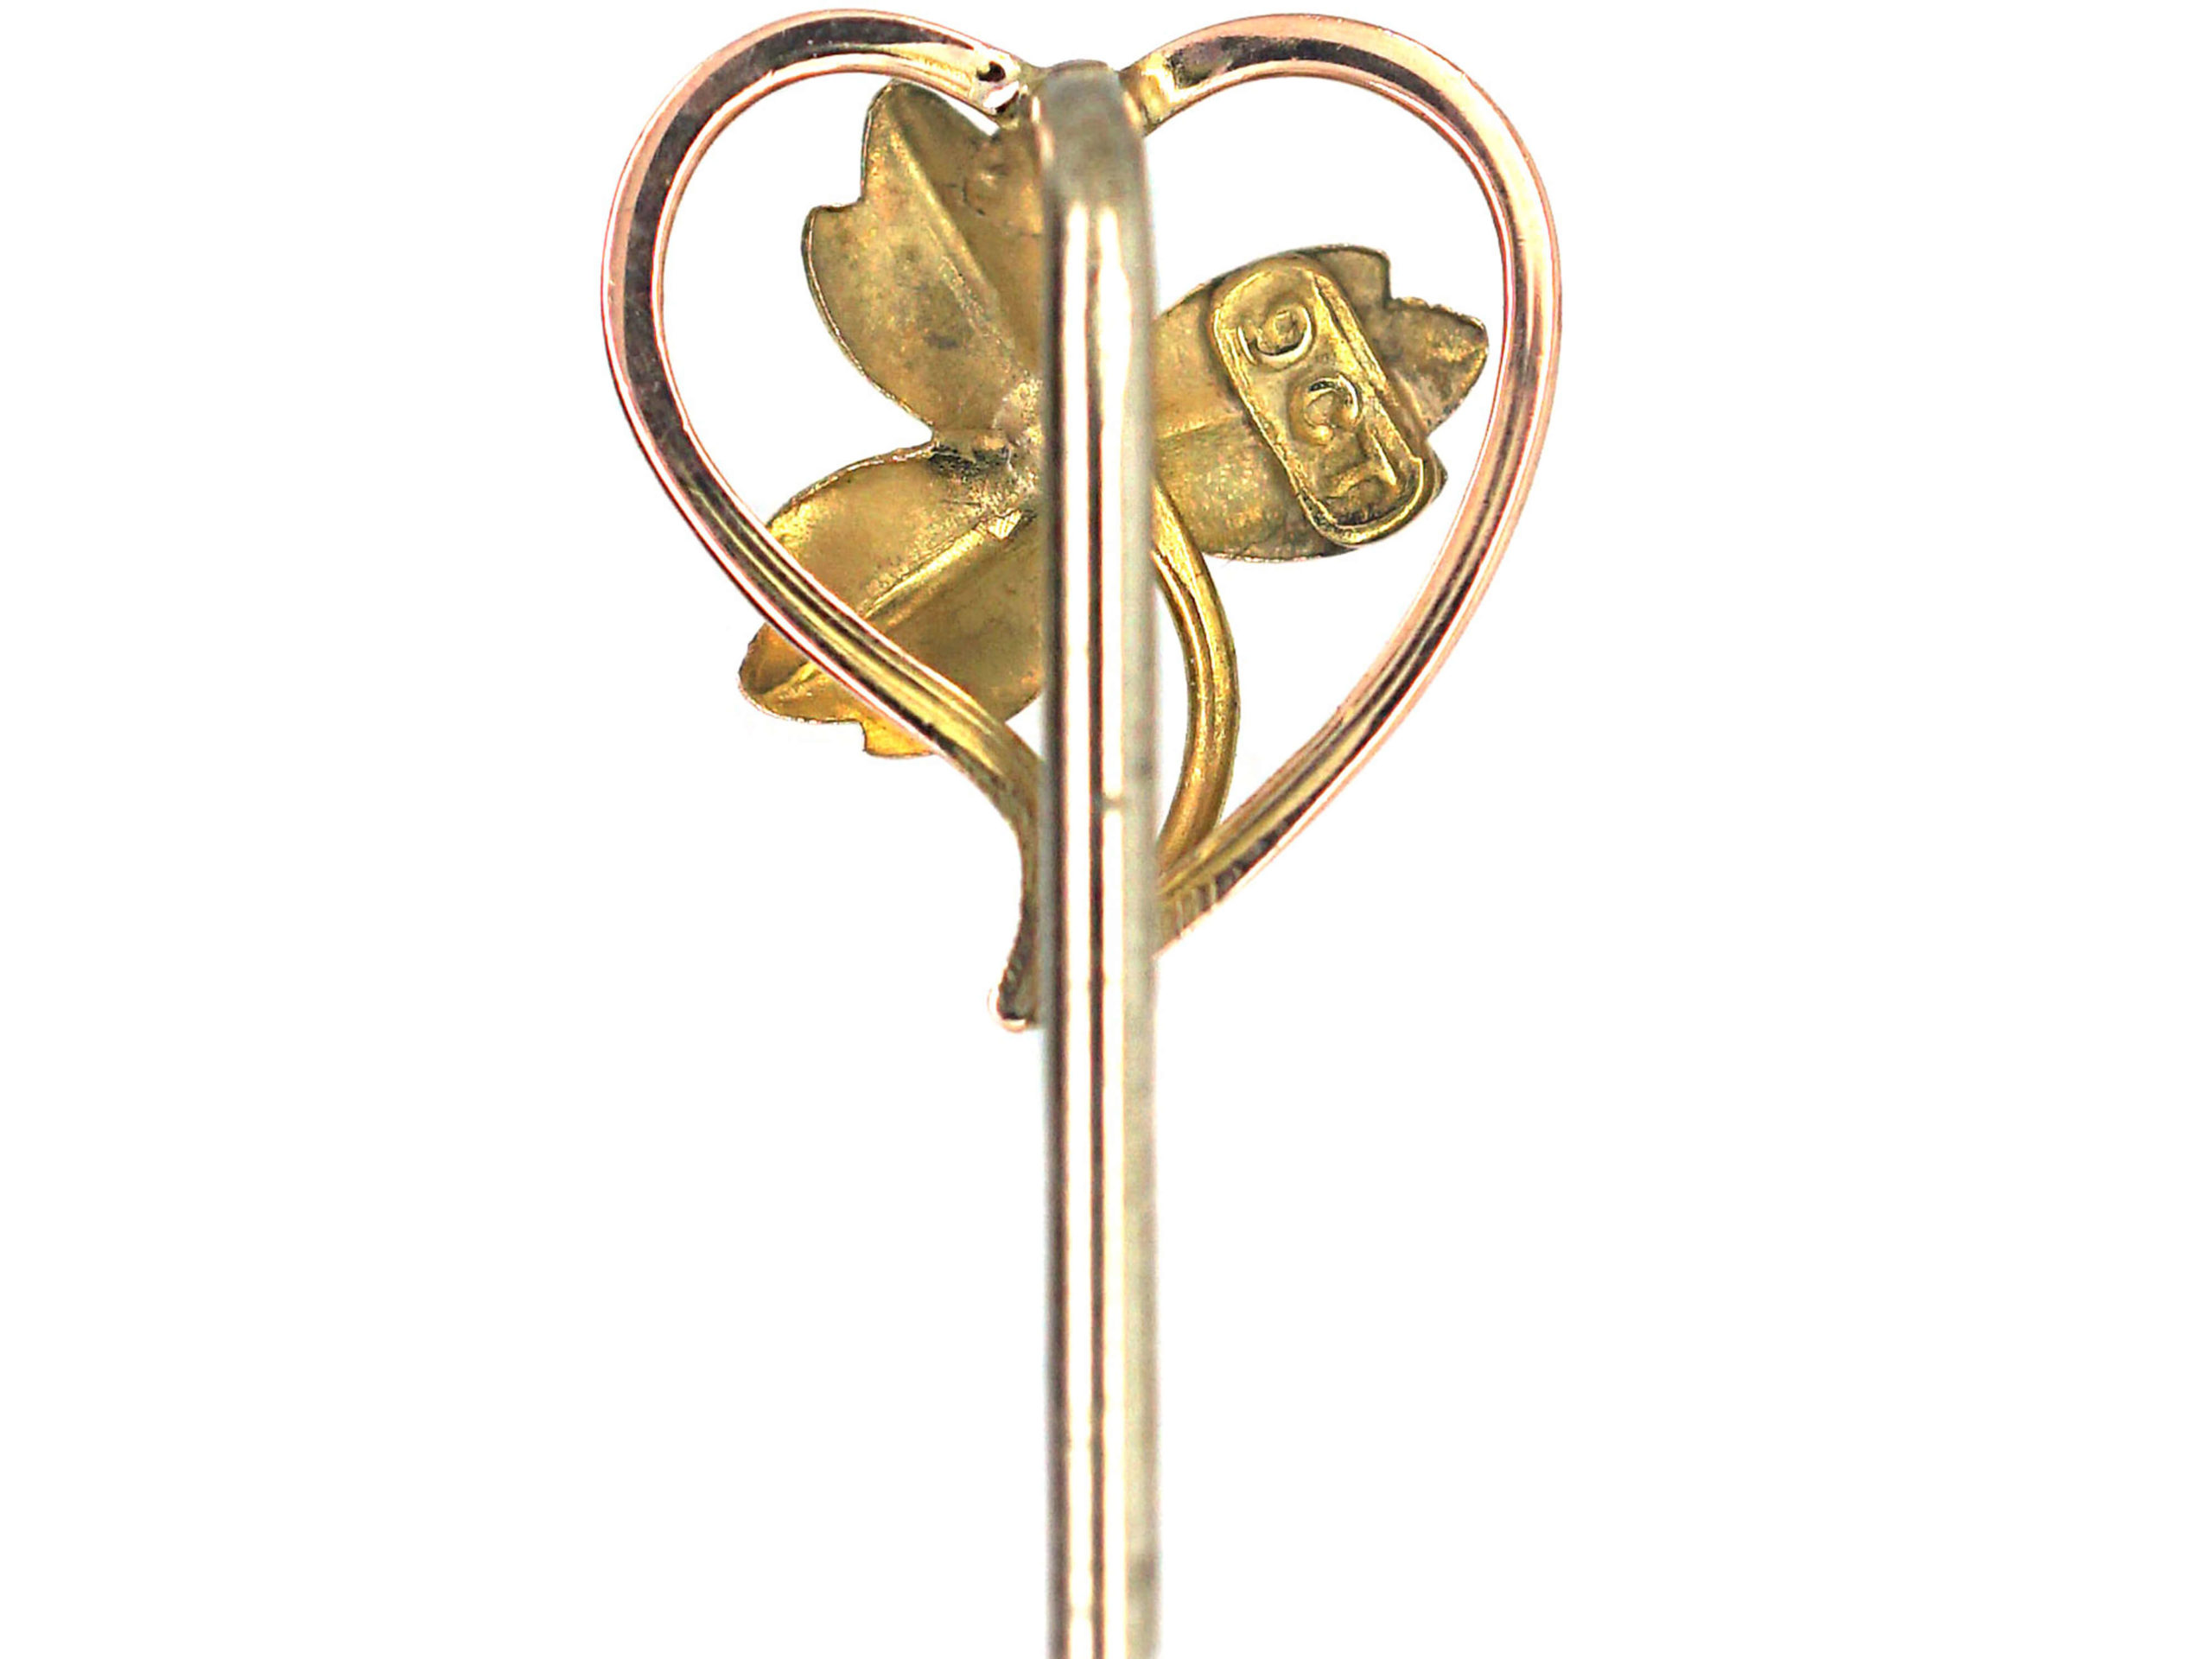 Edwardian 9ct Gold Three Leaf Clover within a Heart Tie Pin (603P